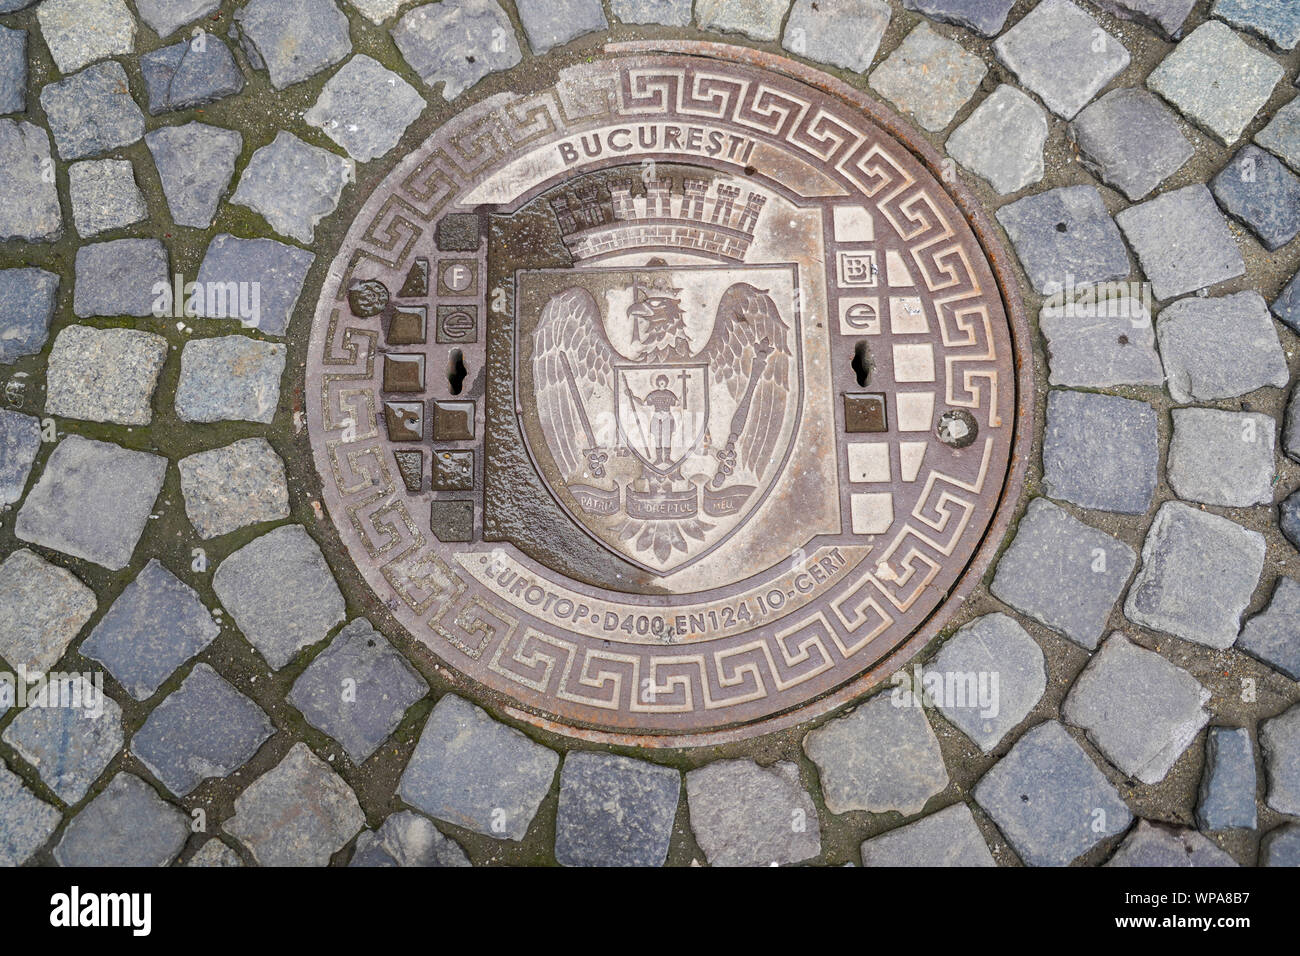 The coat of arms of Bucharest, Romania on a manhole cover Stock Photo